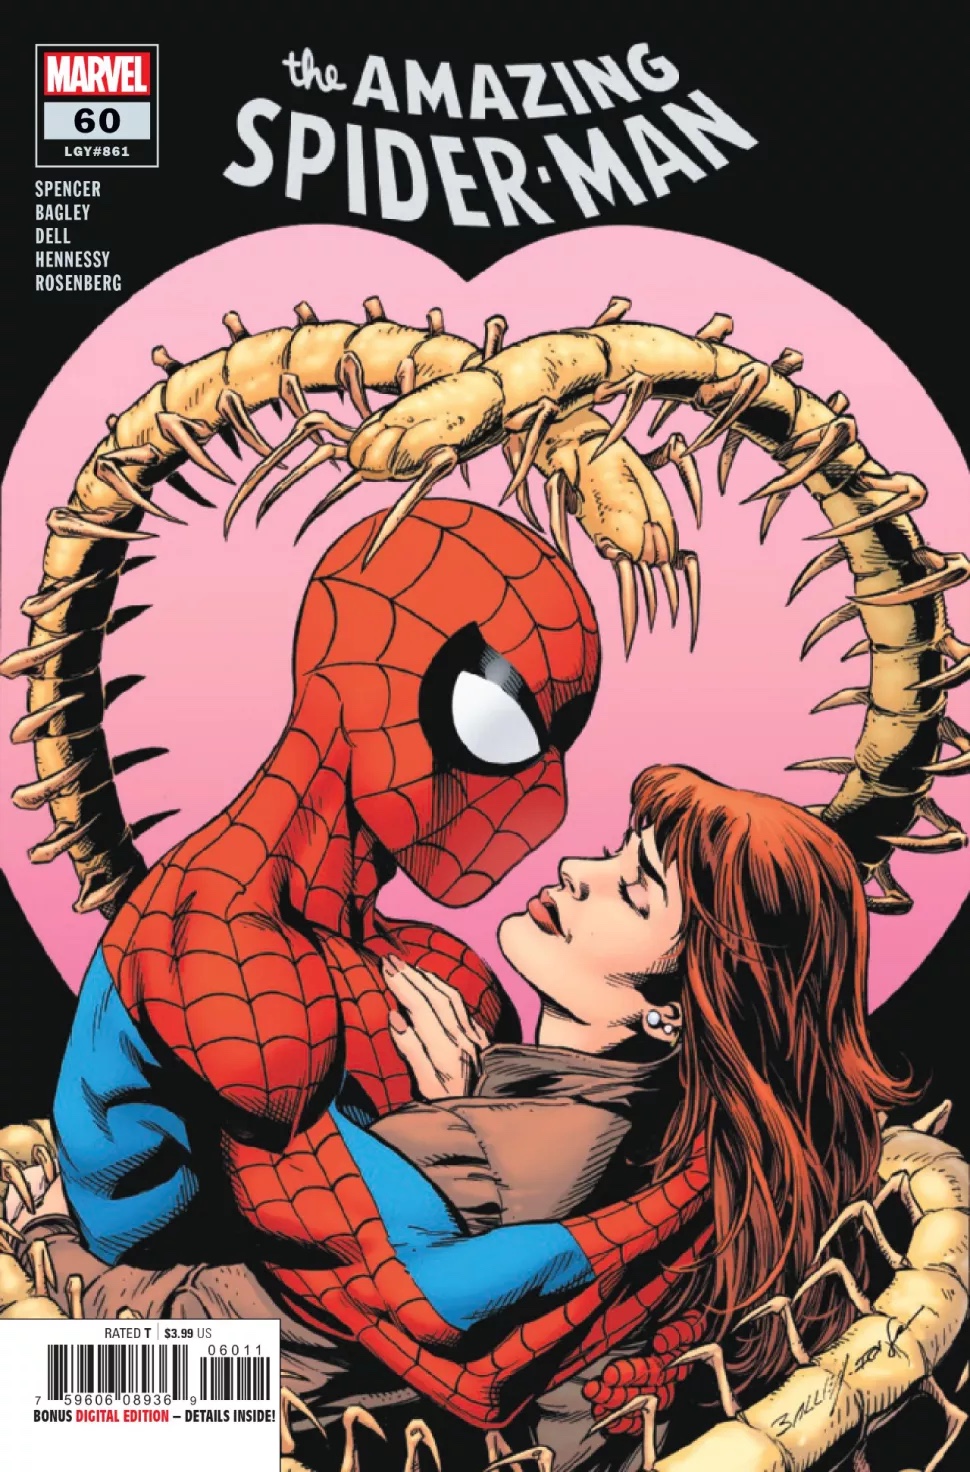 Amazing Spider-Man #60 preview